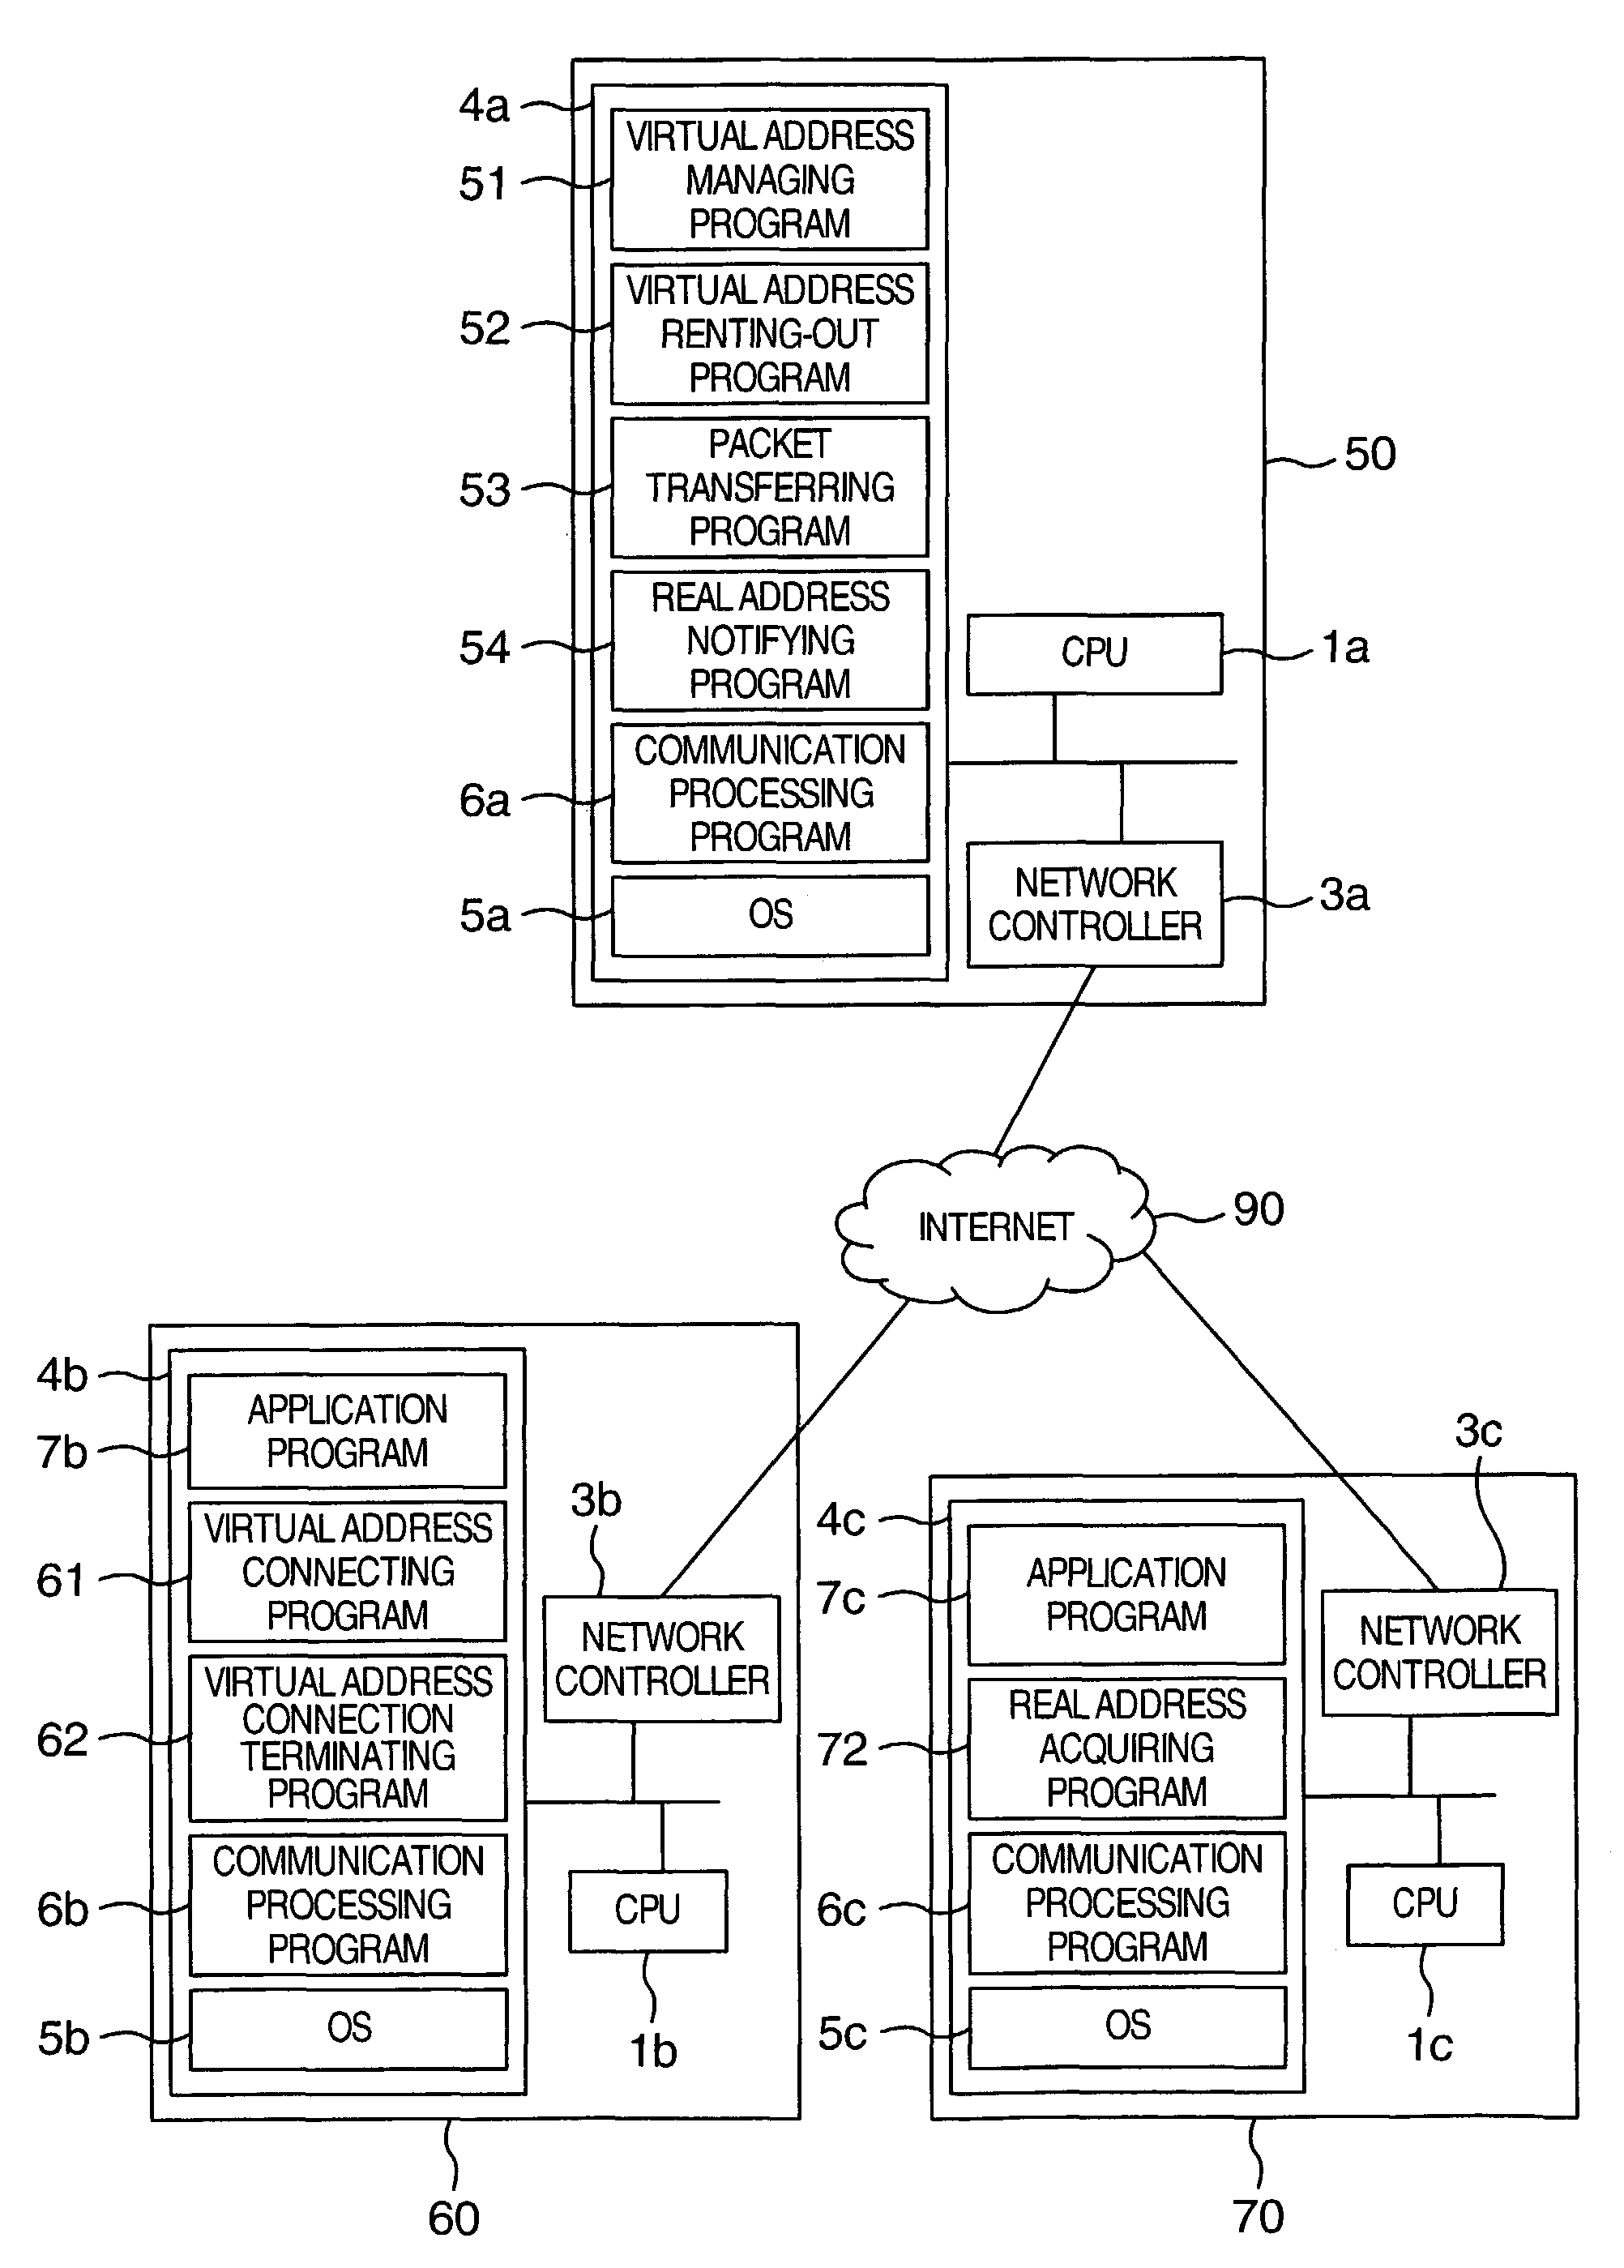 Information processing apparatus for concealing the identity of internet protocol addresses